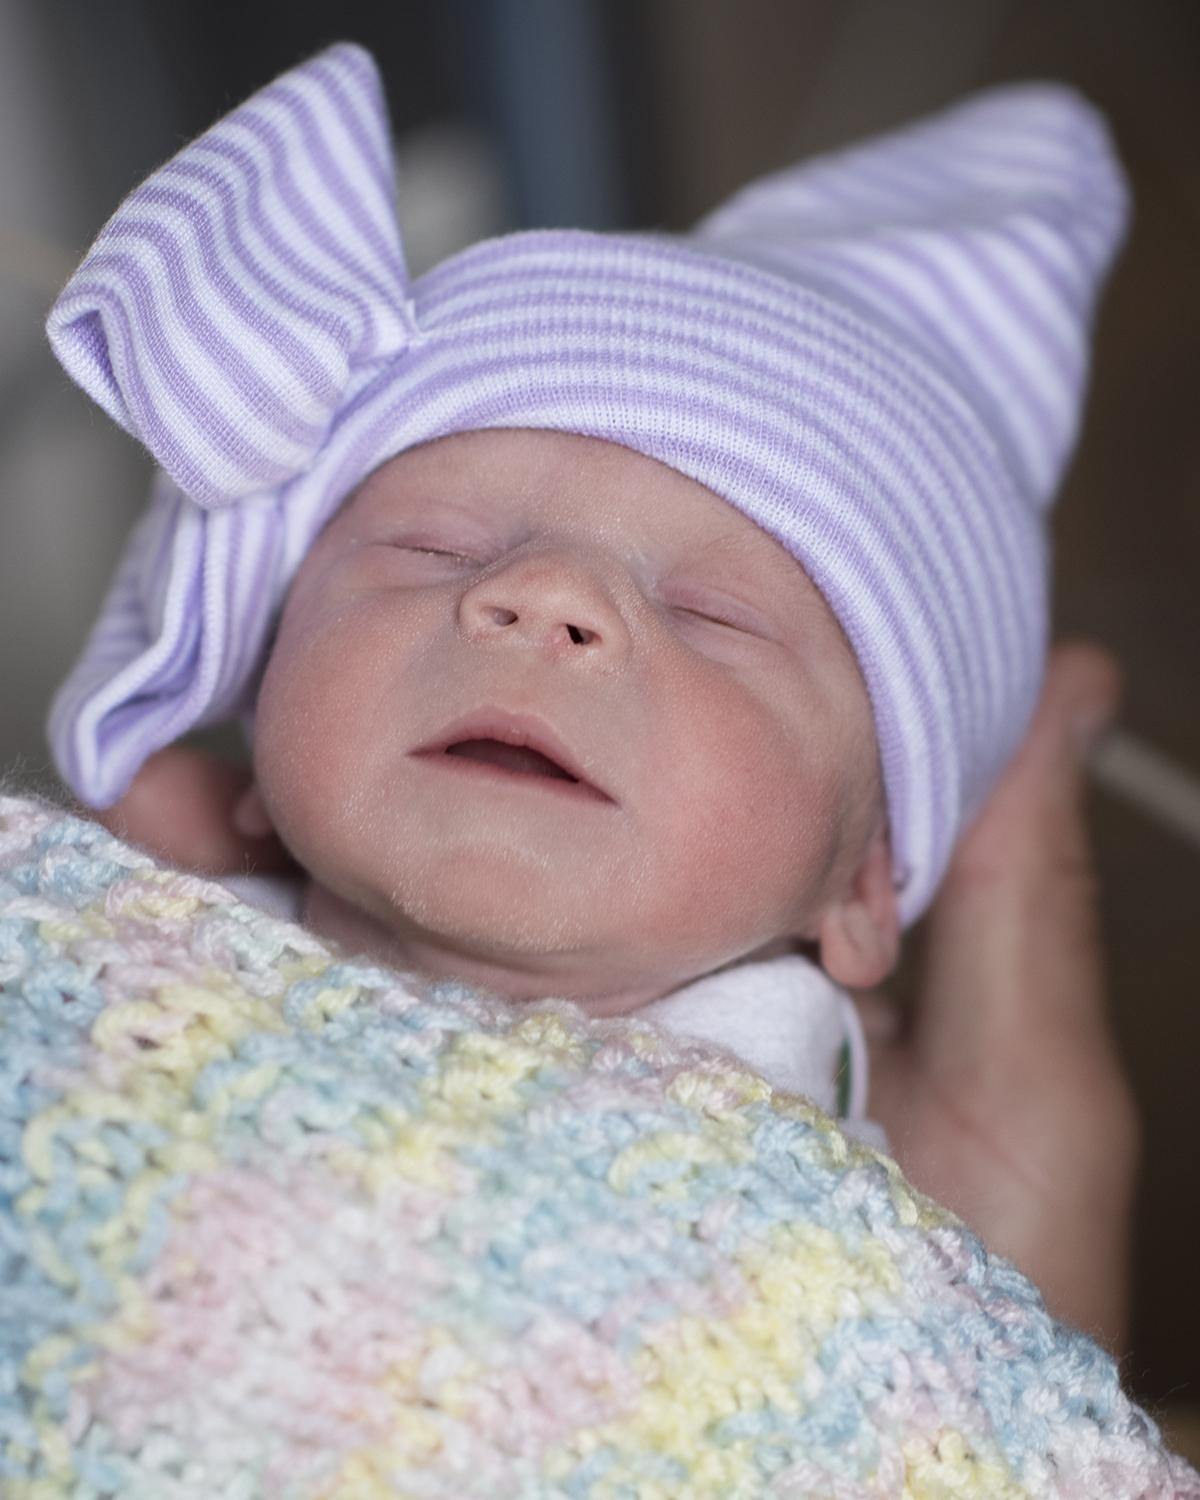 The healthy baby was born in June via C-section (Cleveland Clinic)